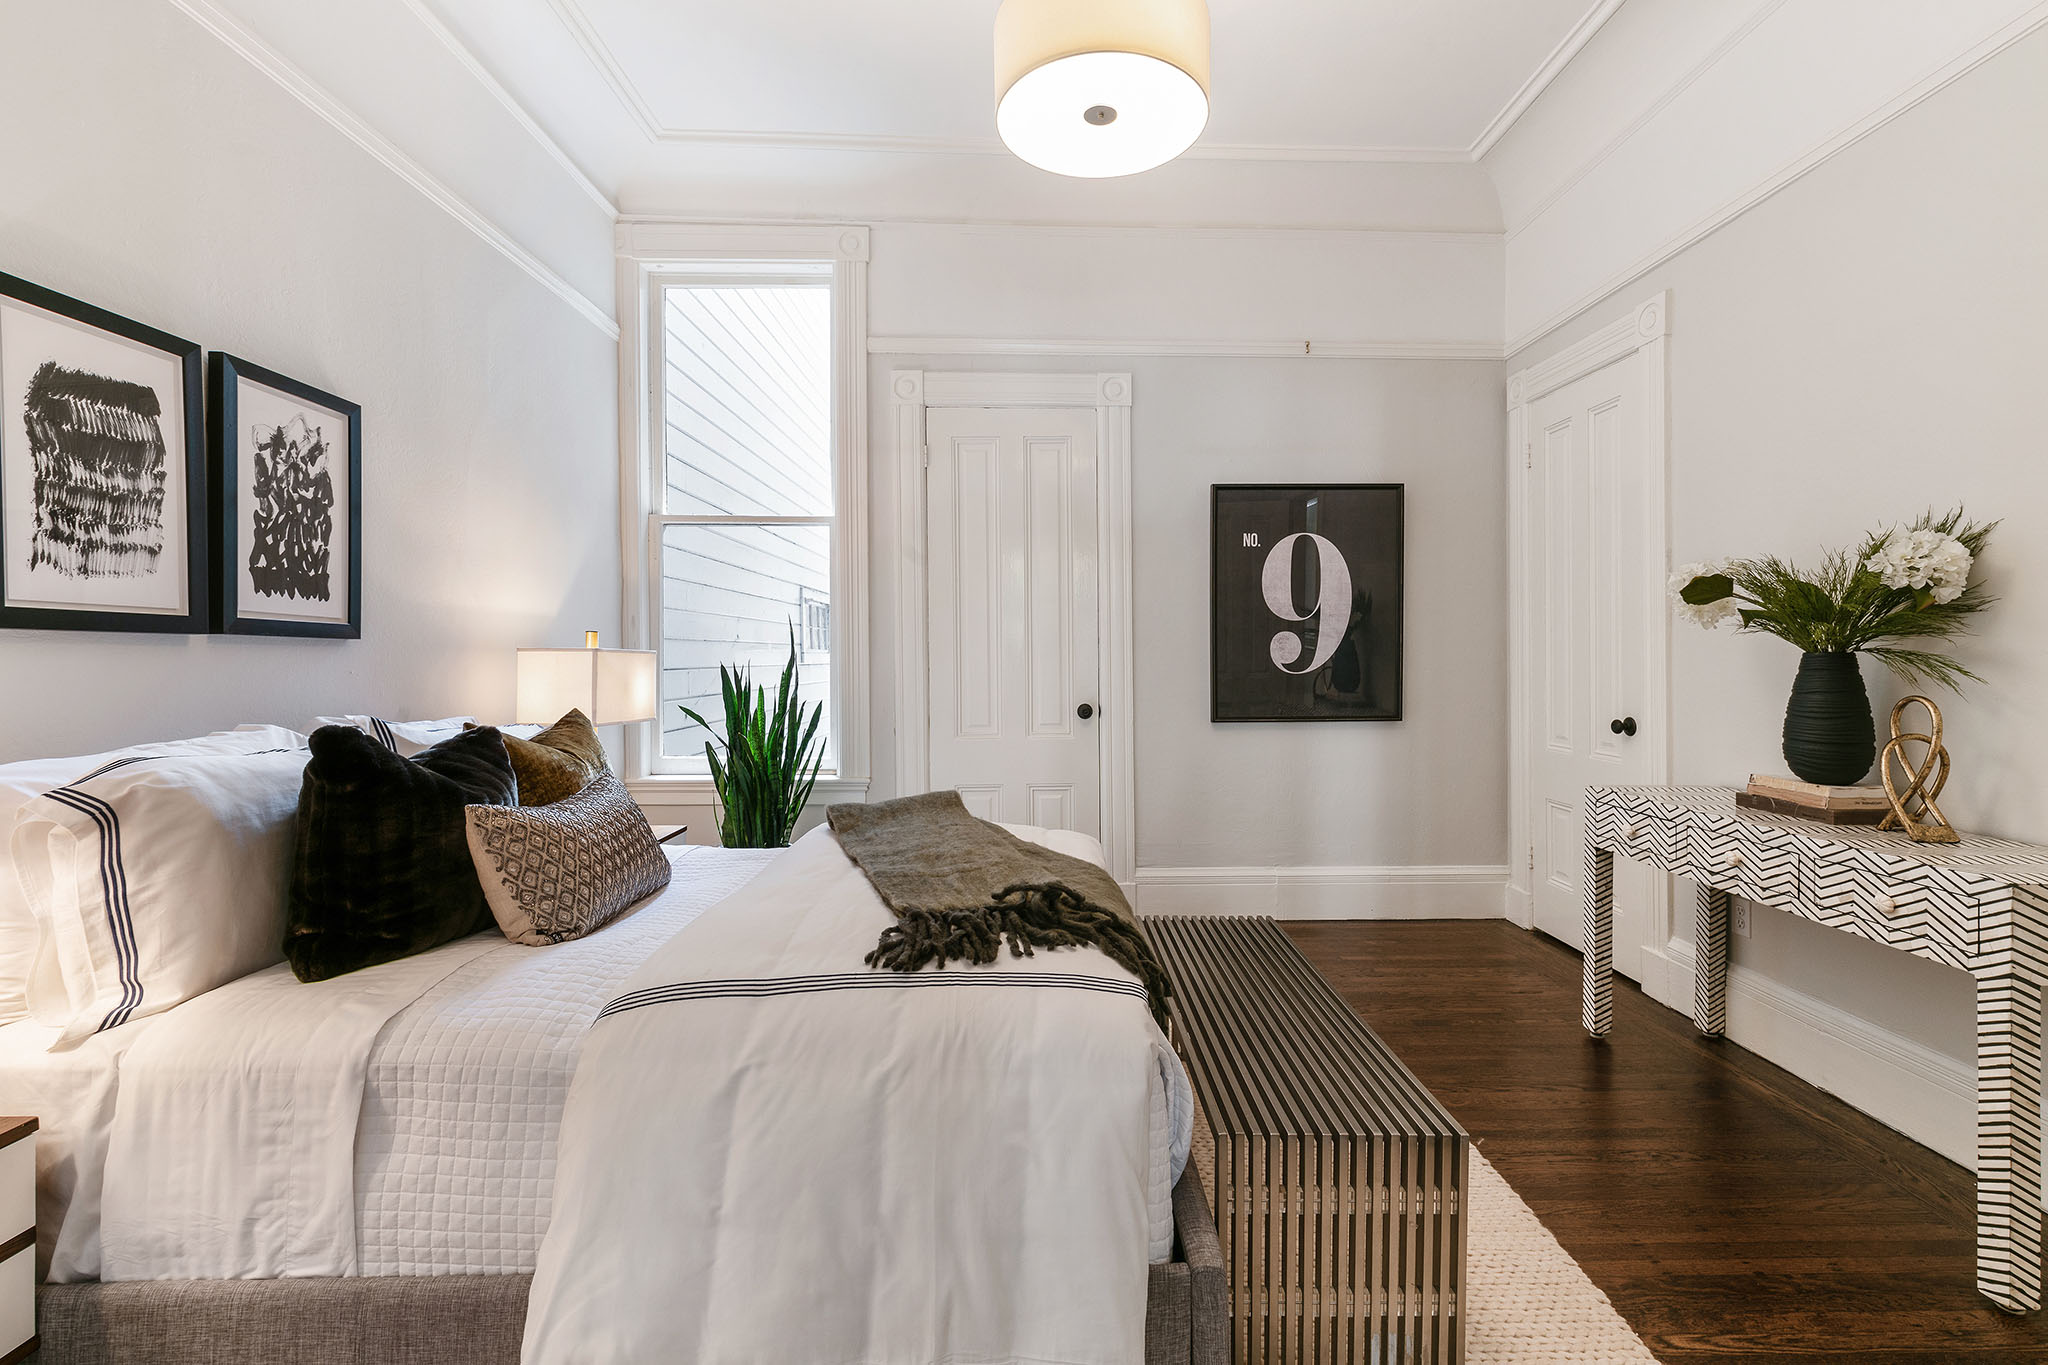 Property Photo: Bedroom with a window, crown moulding, and wood floors